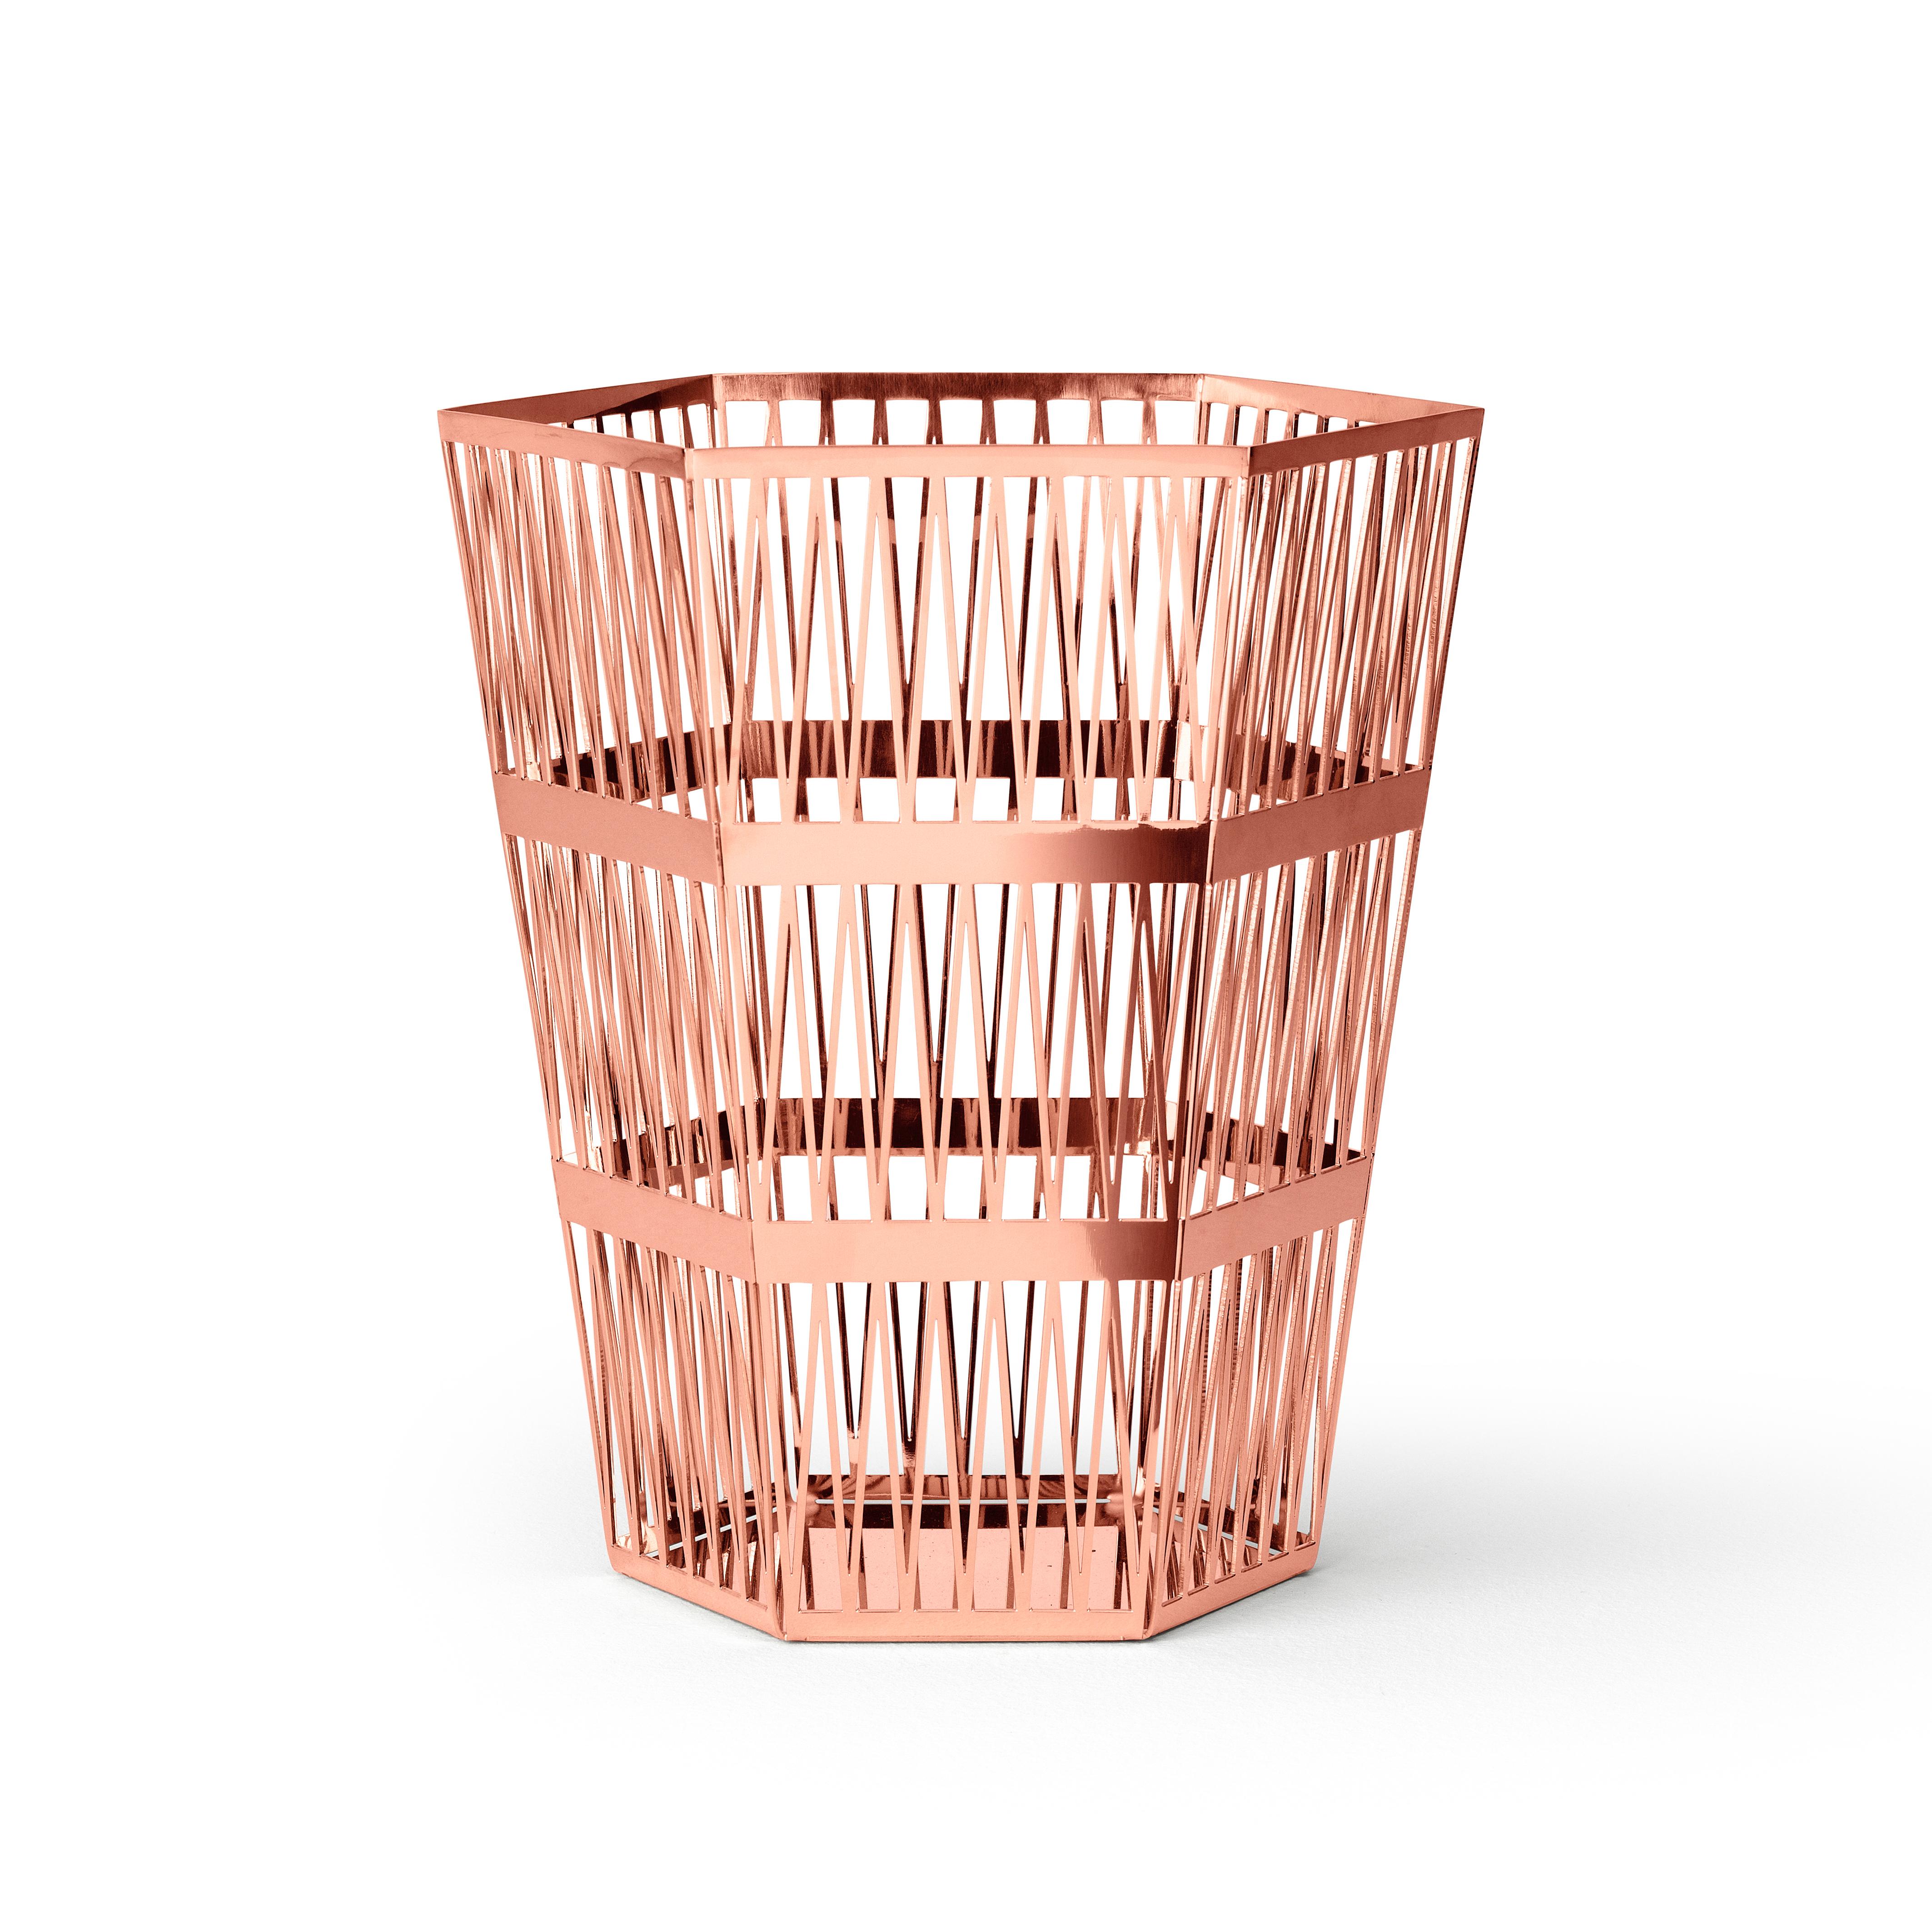 Large paper basket in openwork steel
When you look at the top view of the Tip-Top series, all the triangles have the same size. In 3D these triangles have been stretched, which creates a very surprising hexagonal structure, applied to different